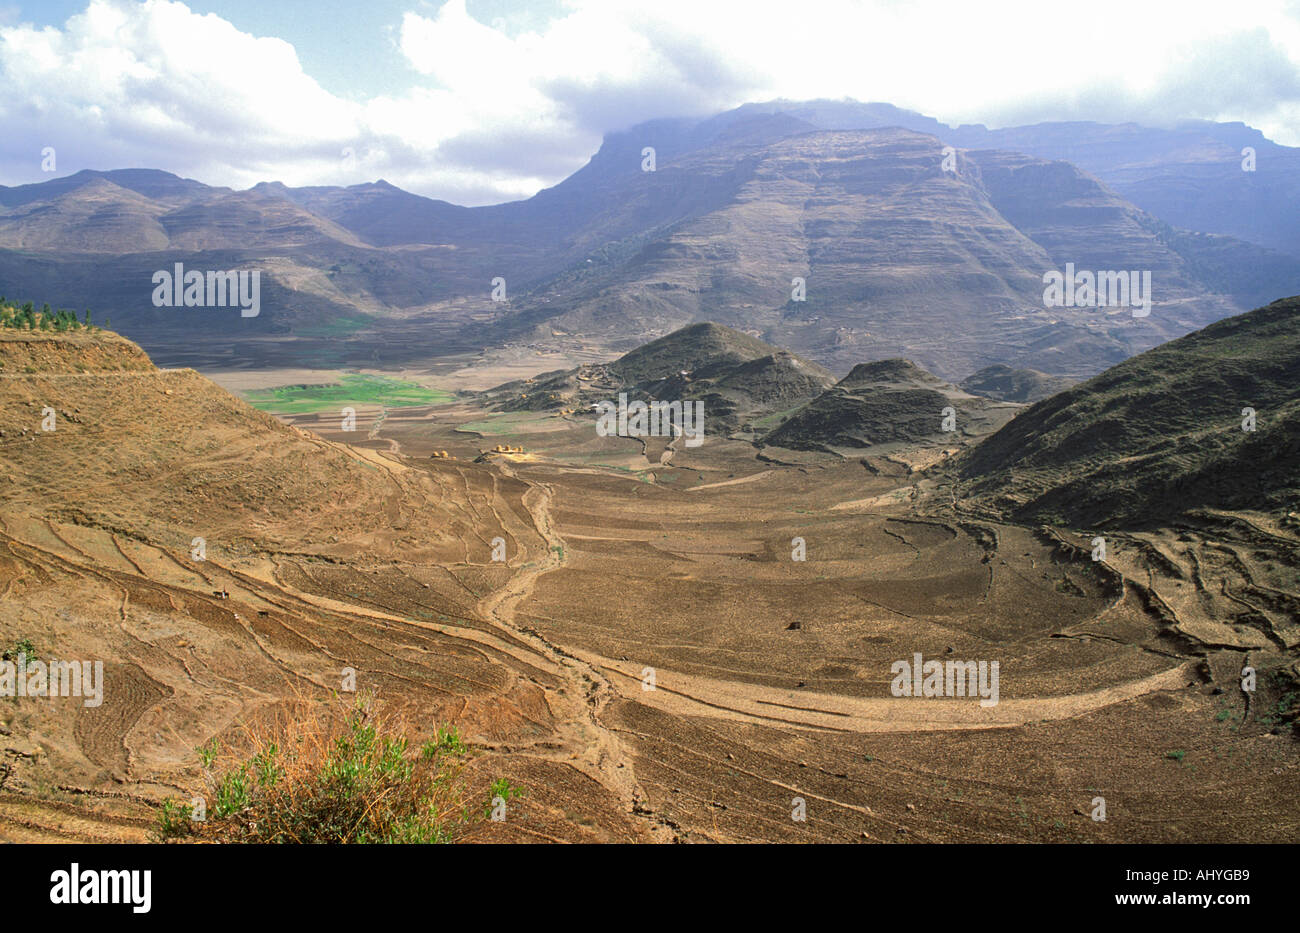 A landscape of deforested and drought-parched hills in the Great Rift Valley, Tigray, Northern Ethiopia Stock Photo